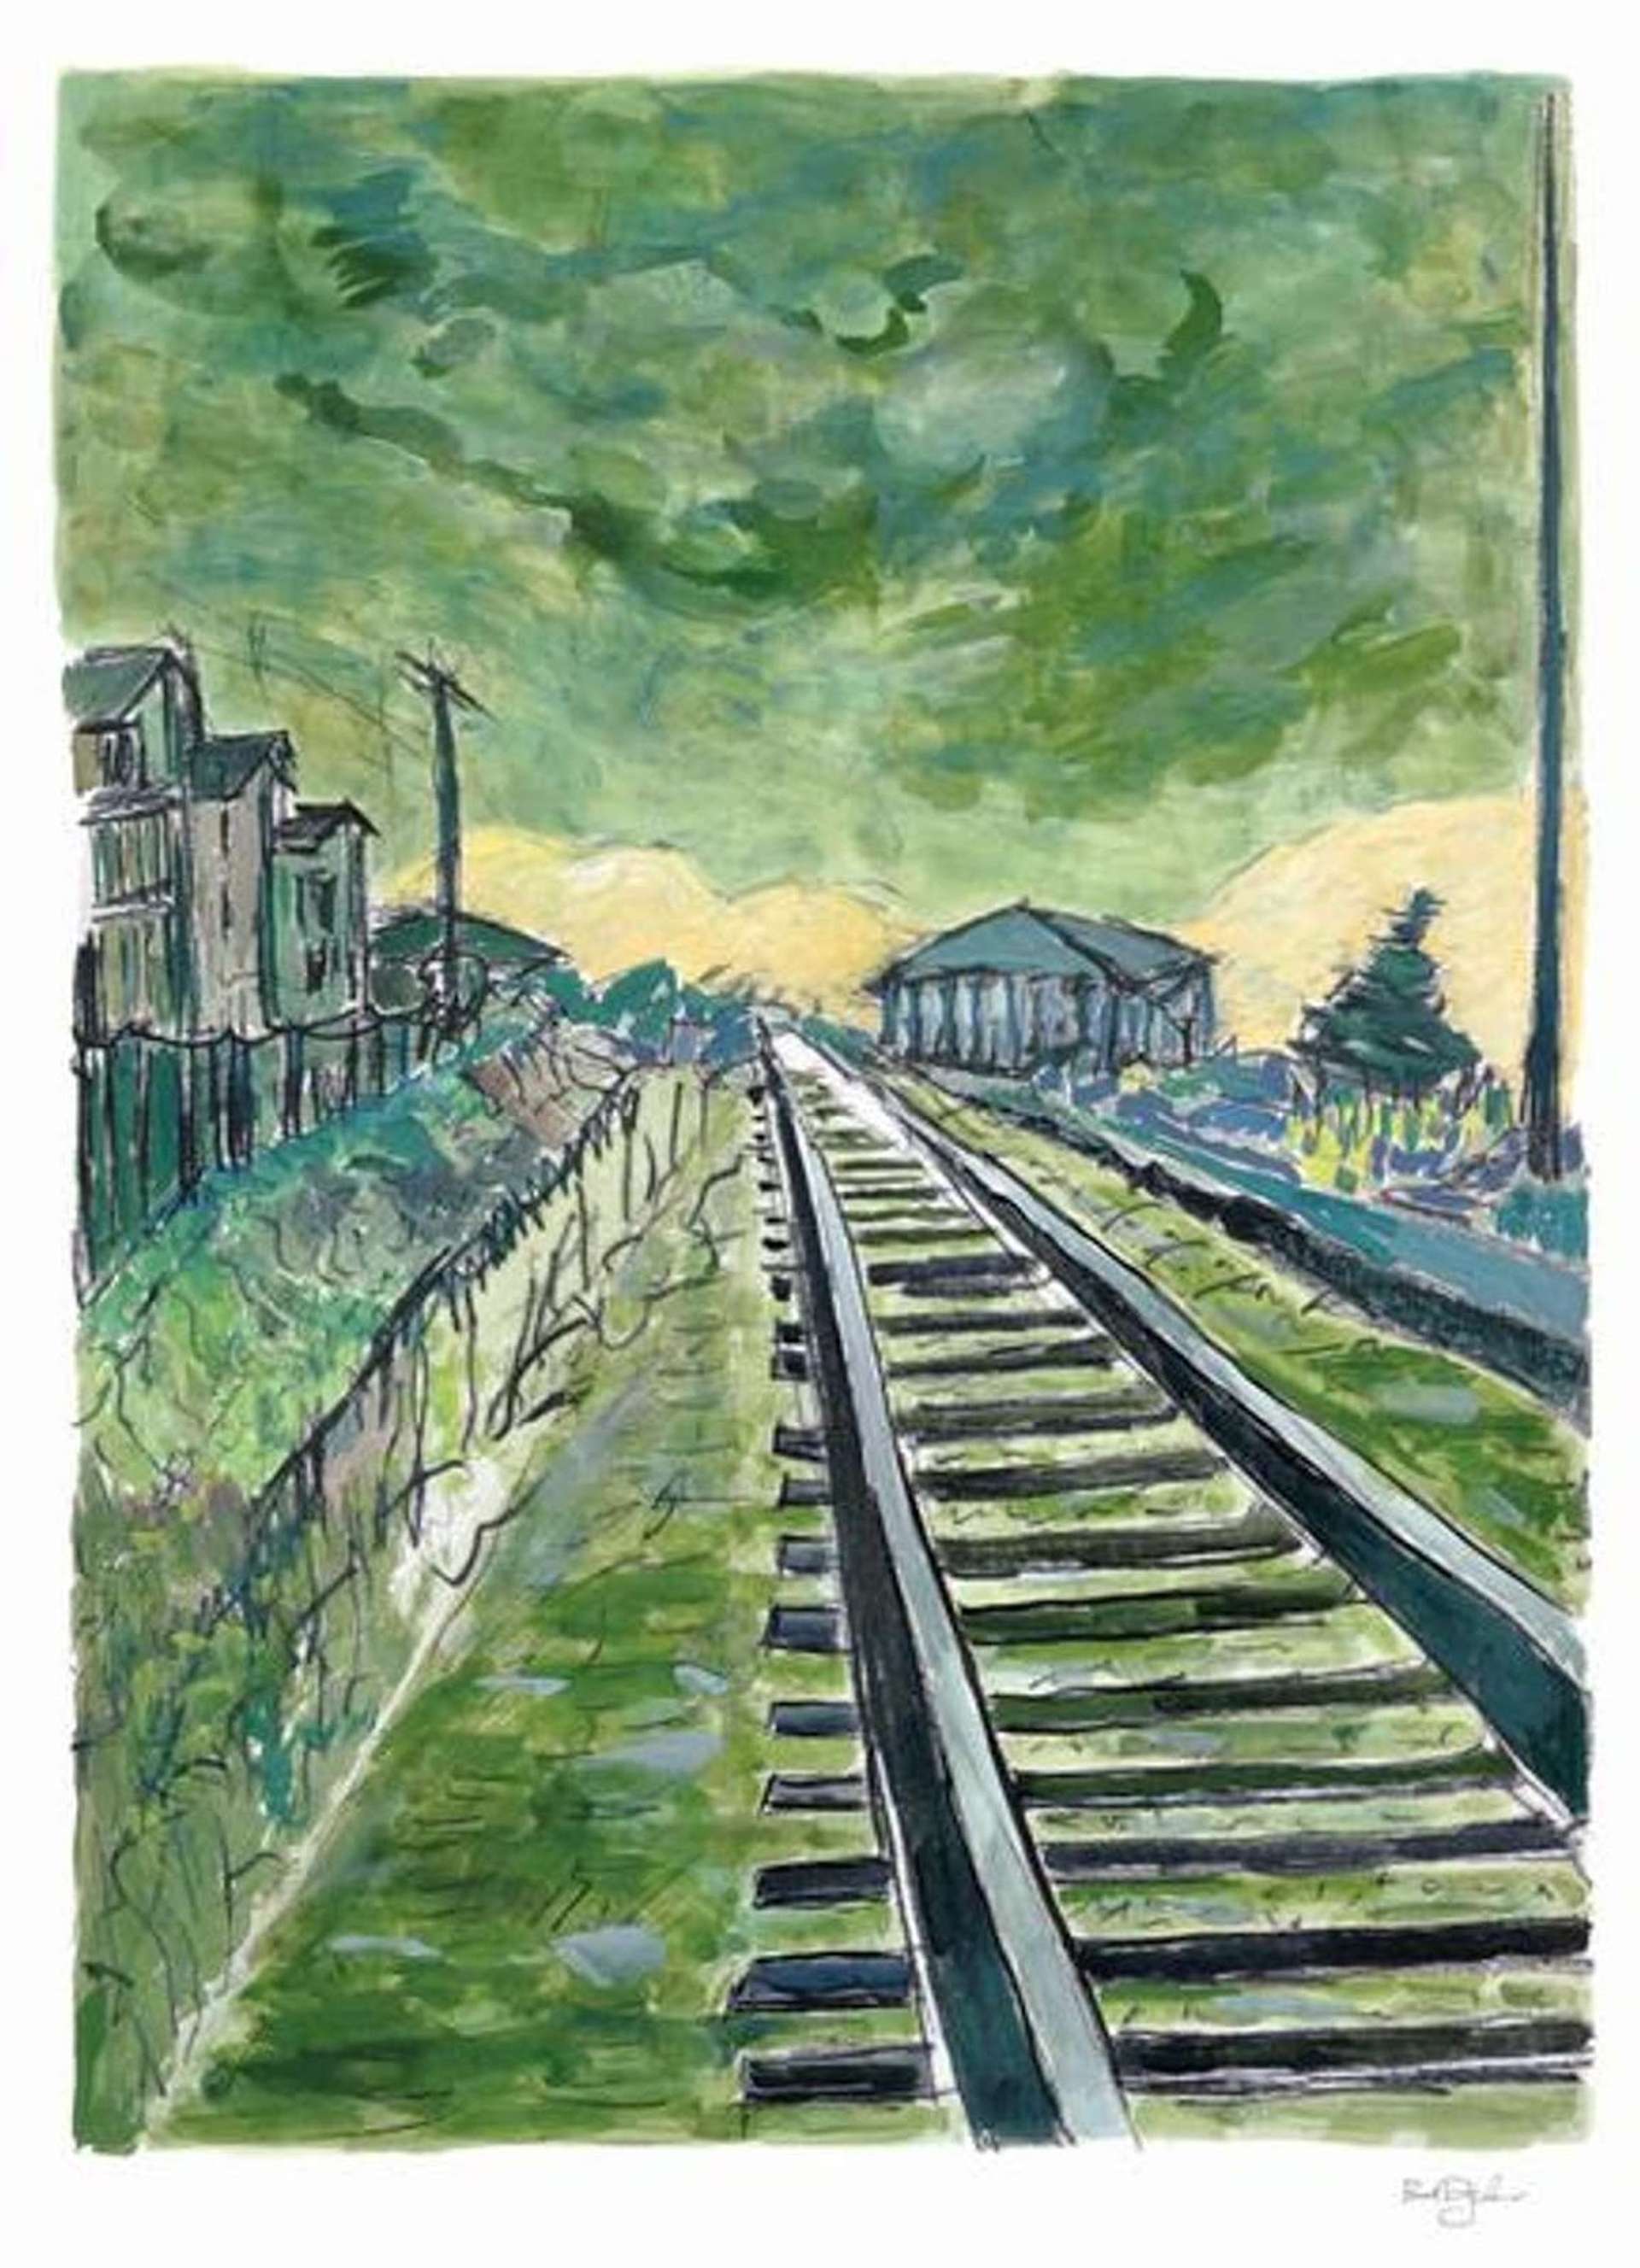  A landscape by artist Bob Dylan. This one depicts a city built around some train tracks, with the colour green dominating the colour palette.